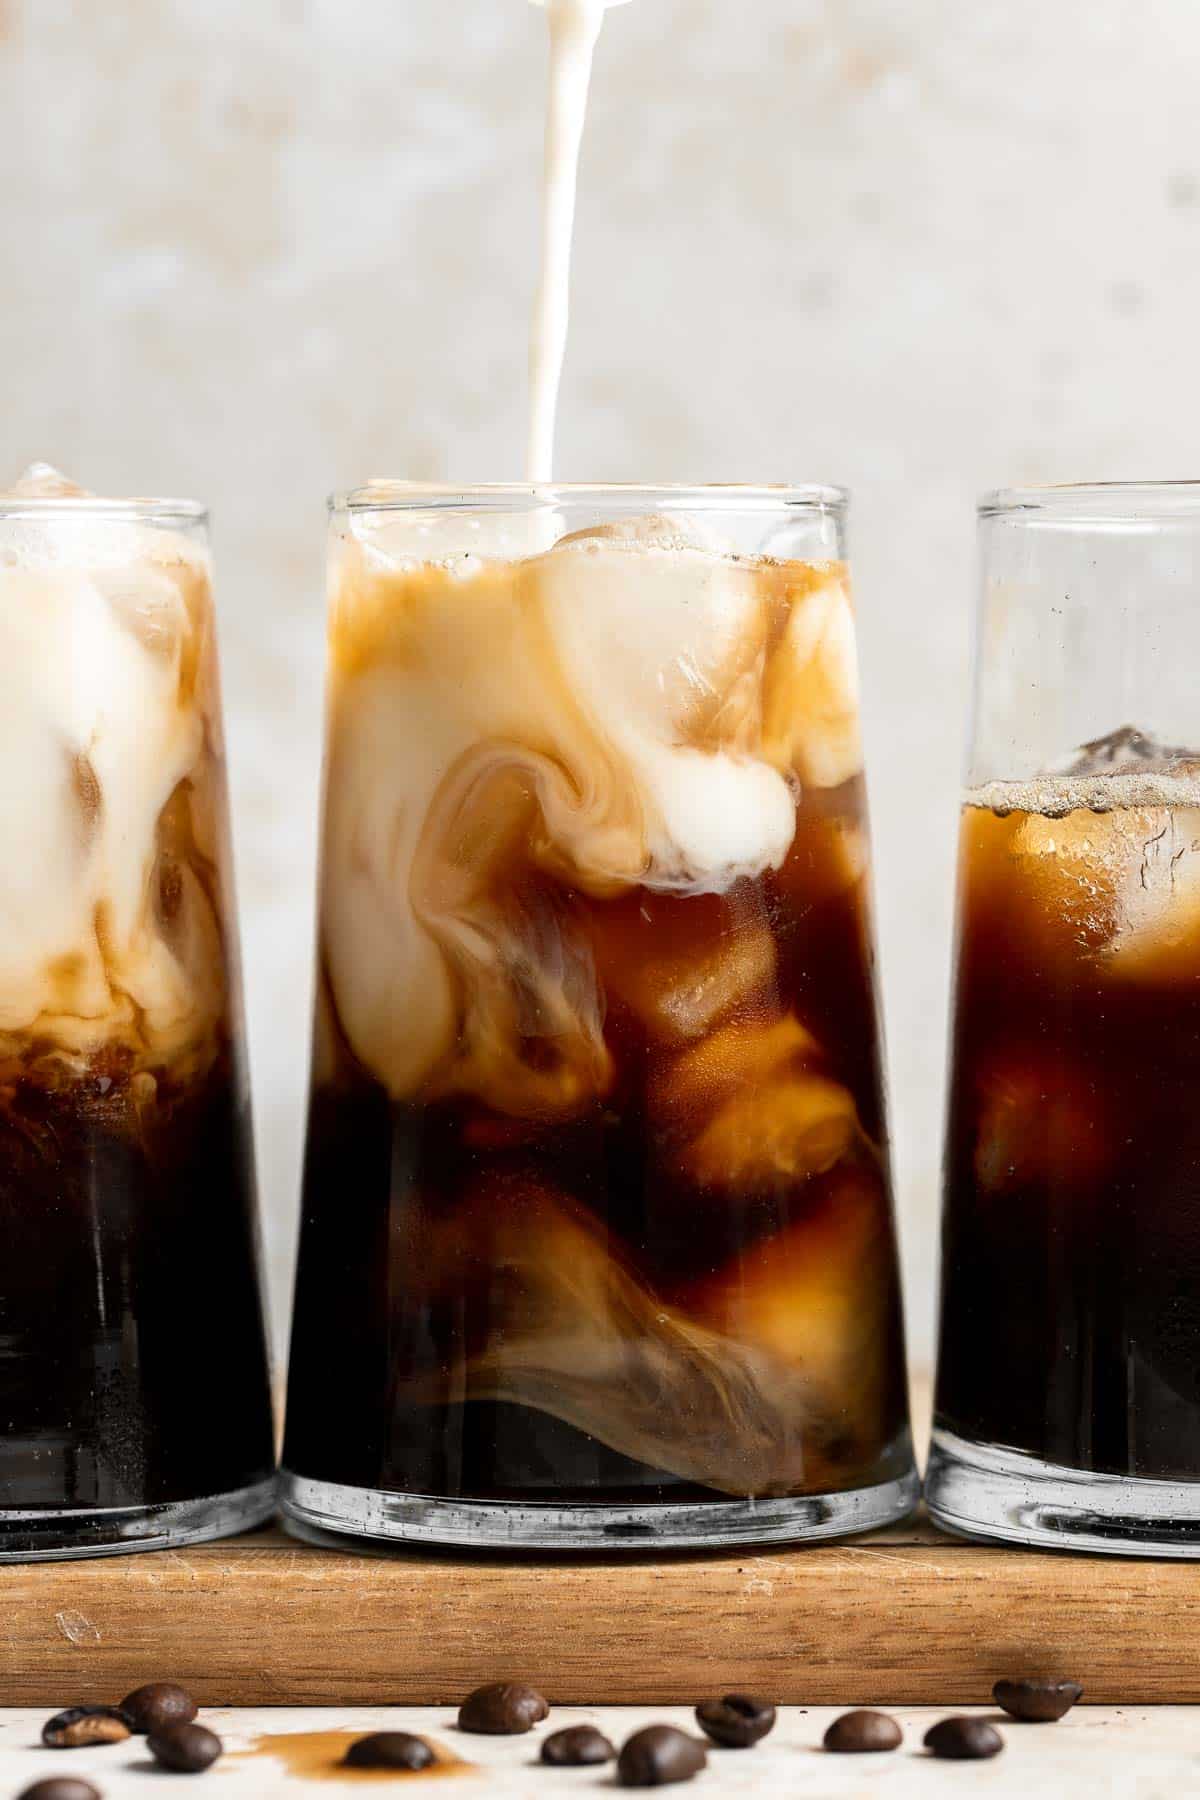 Homemade Cold Brew Coffee is rich, smooth, and mellow. It’s less acidic and bitter than regular coffee, making it the best iced coffee drink this summer. | aheadofthyme.com